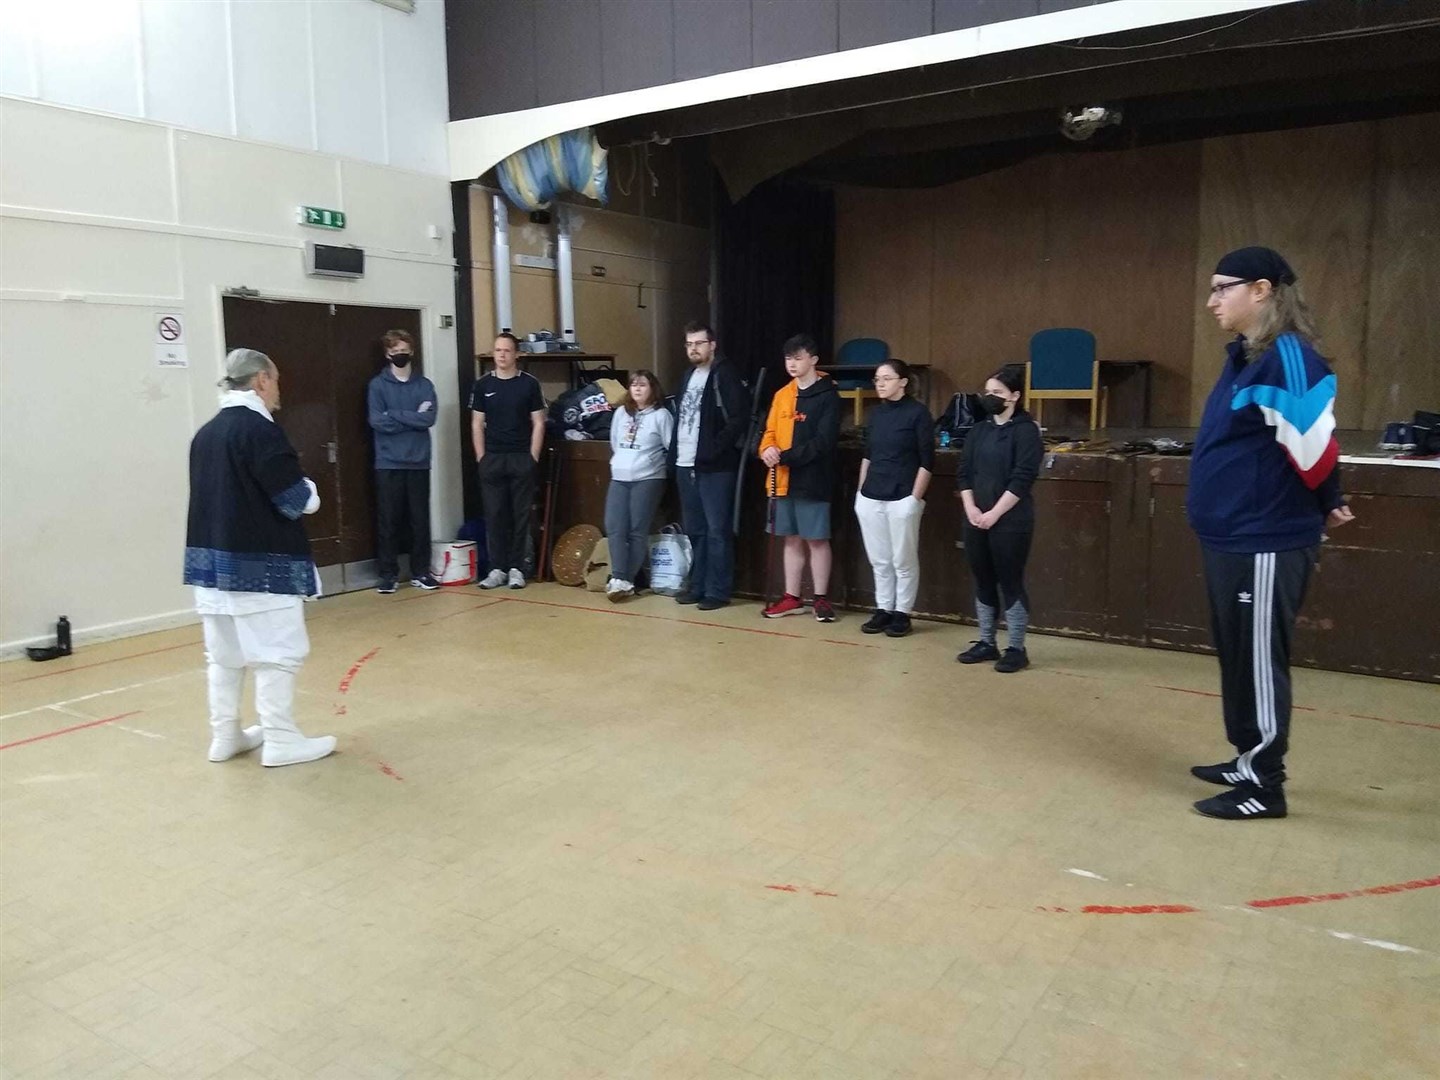 Mick Skelly and participants on the one-day historical fencing course which was held on Dingwall. Photo: Ali Cameron